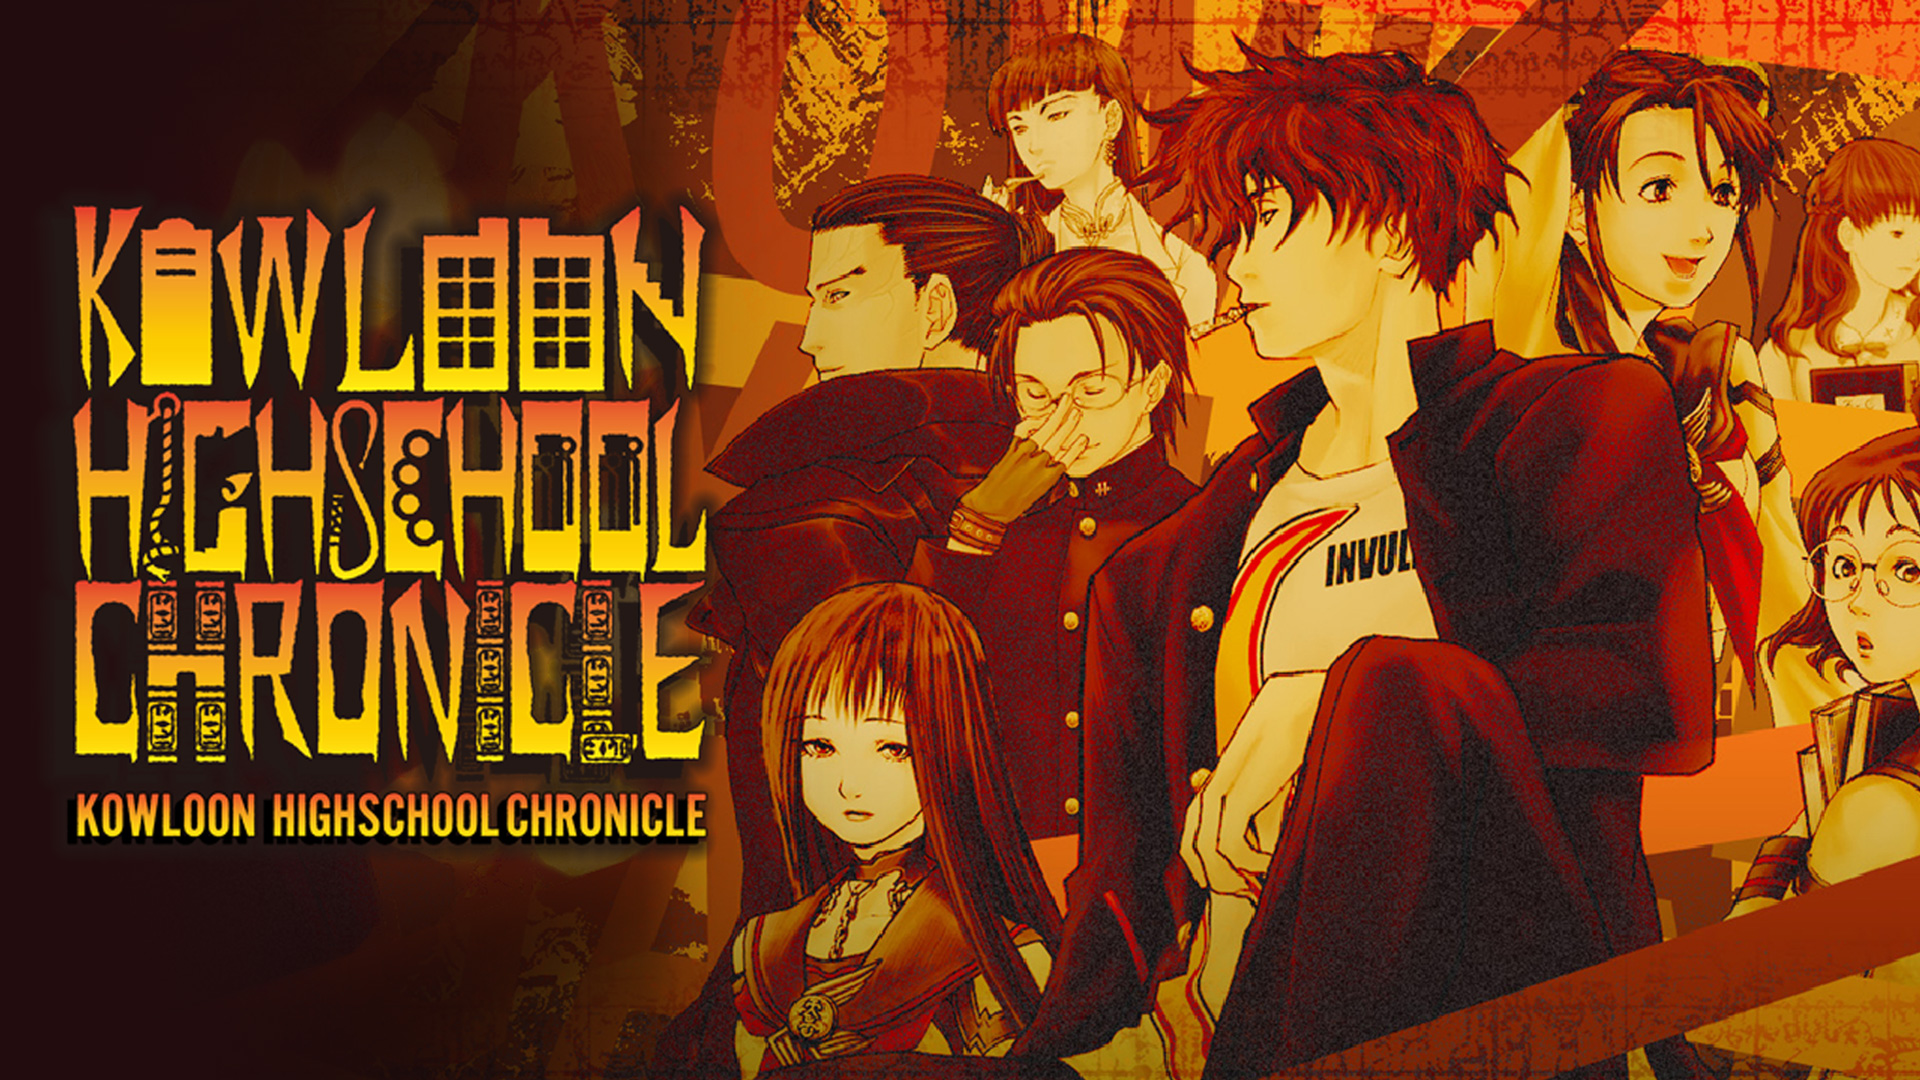 Kowloon Highschool Chronicle Mysteries Await This March 26 on PlayStation®4